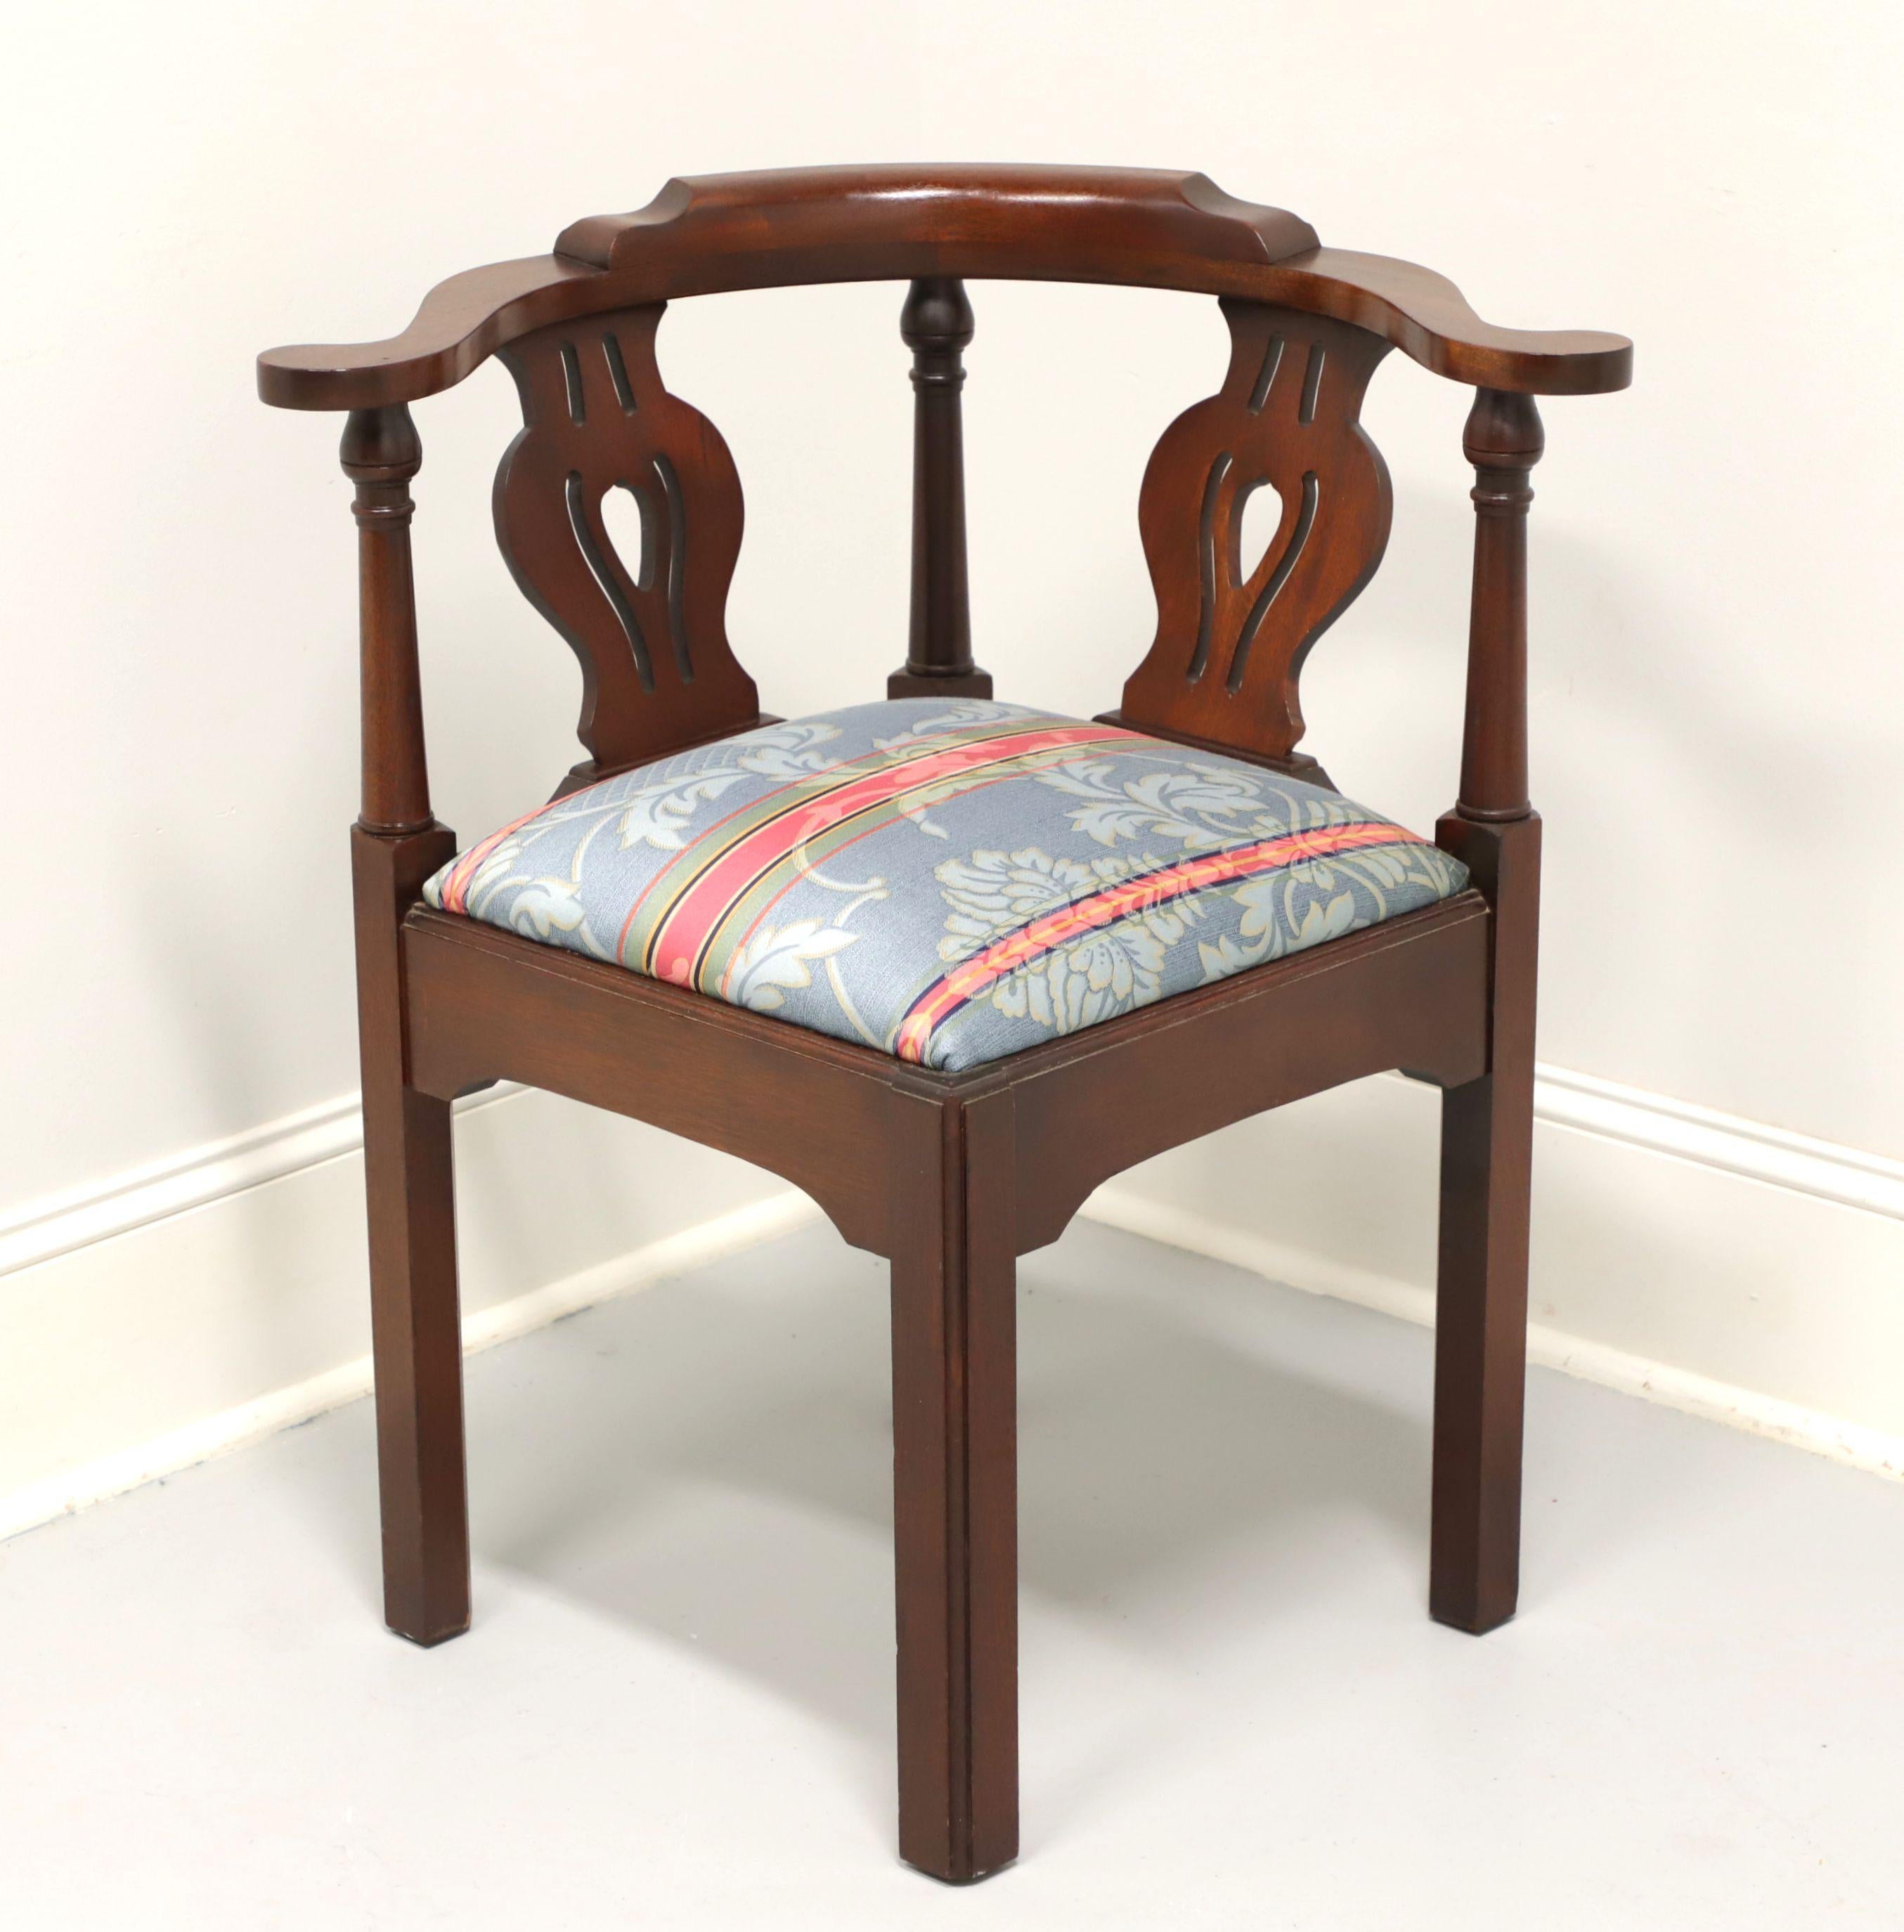 CRAFTIQUE Mahogany Chippendale Corner Chair 3